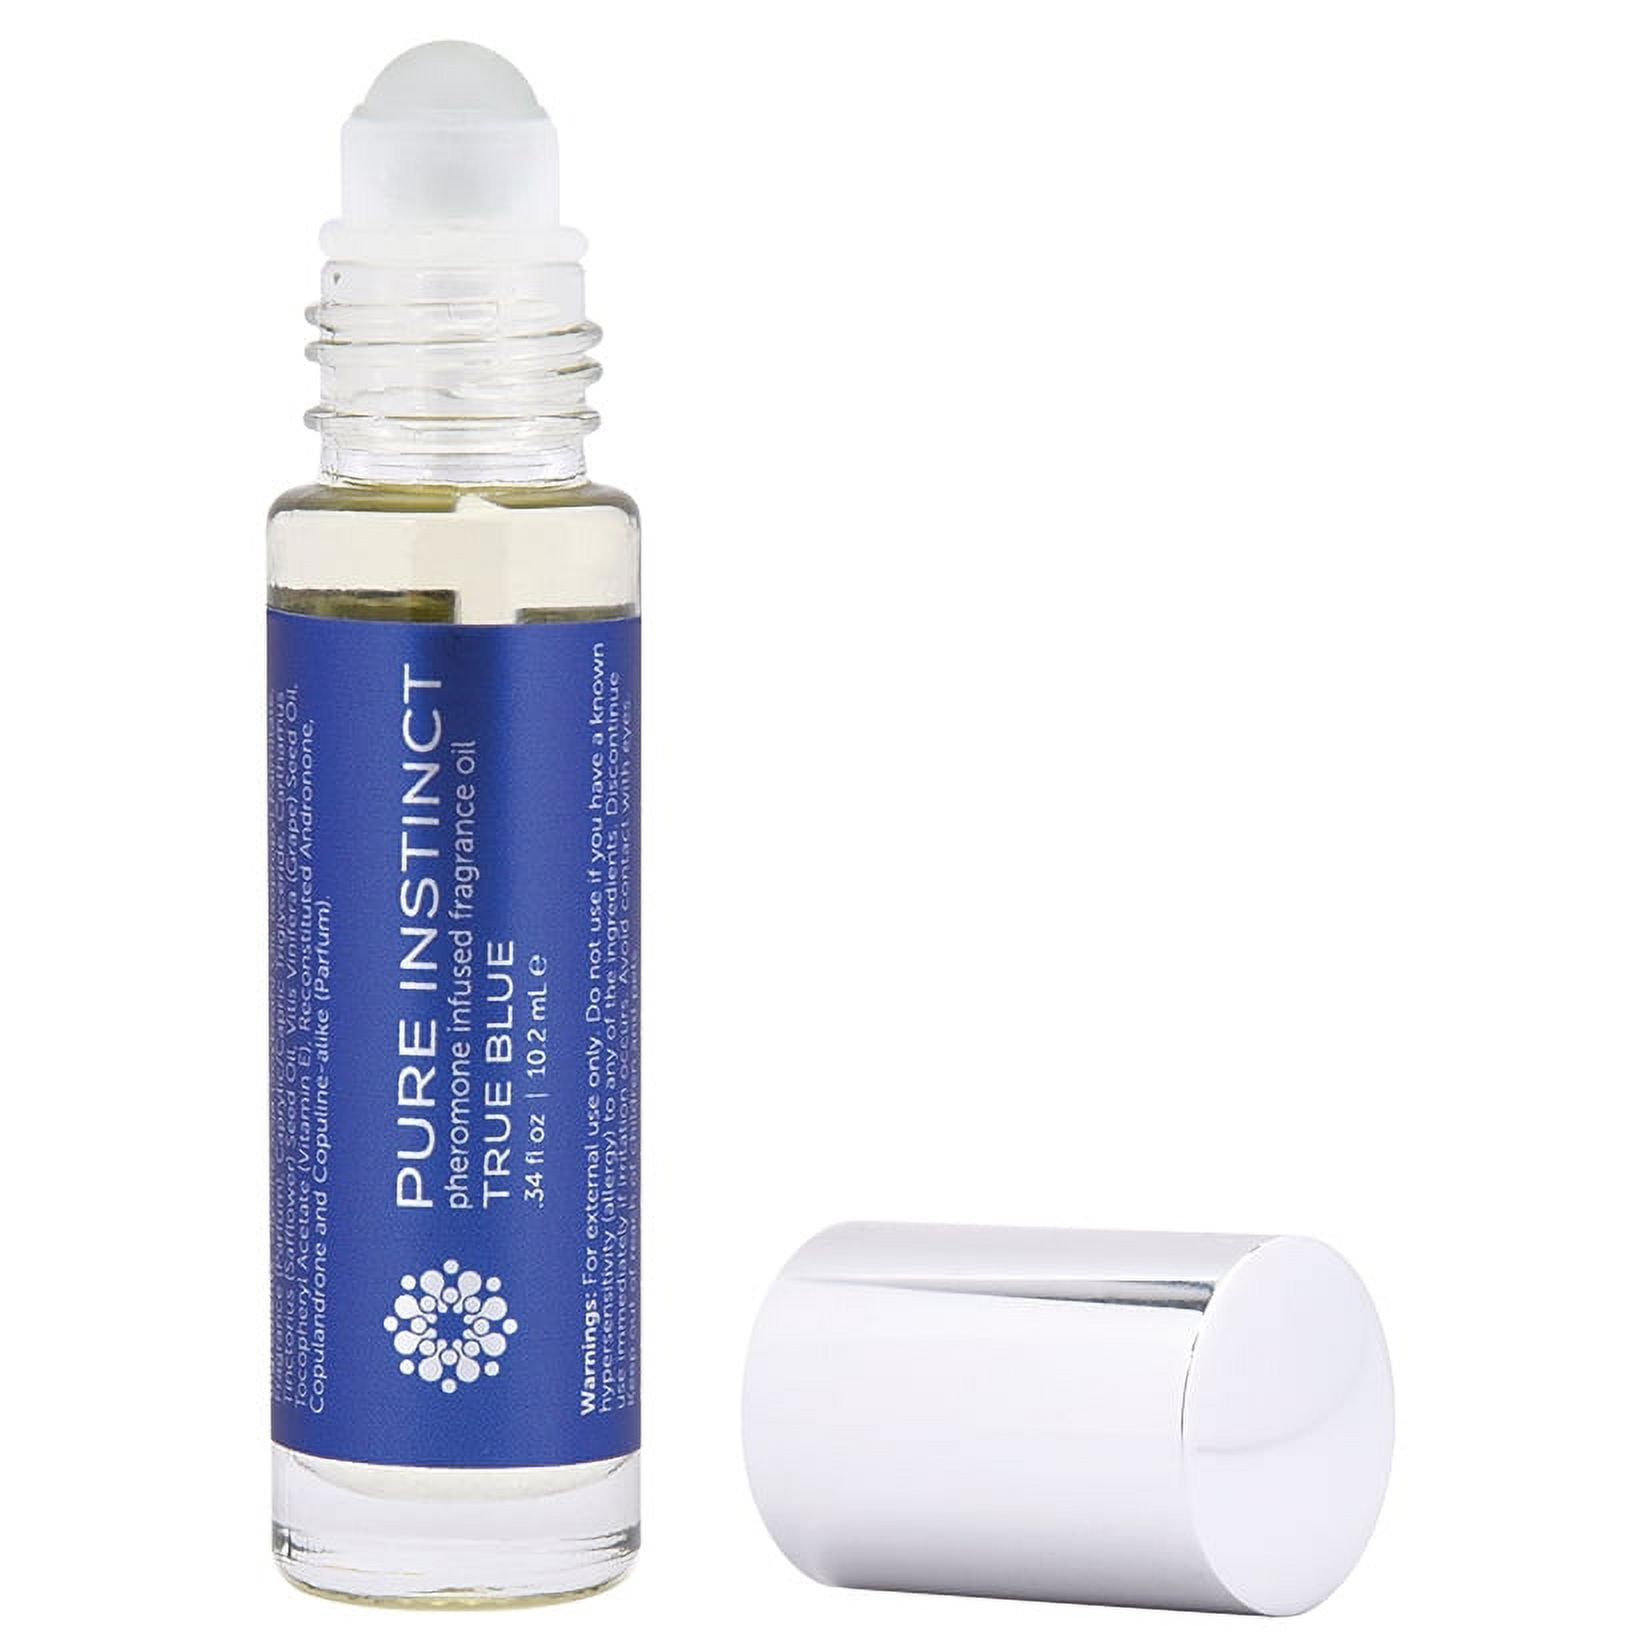 Pure Instinct Roll-On - The Original Pheromone Infused Essential Oil  Perfume Cologne - Unisex For Men and Women - TSA Ready